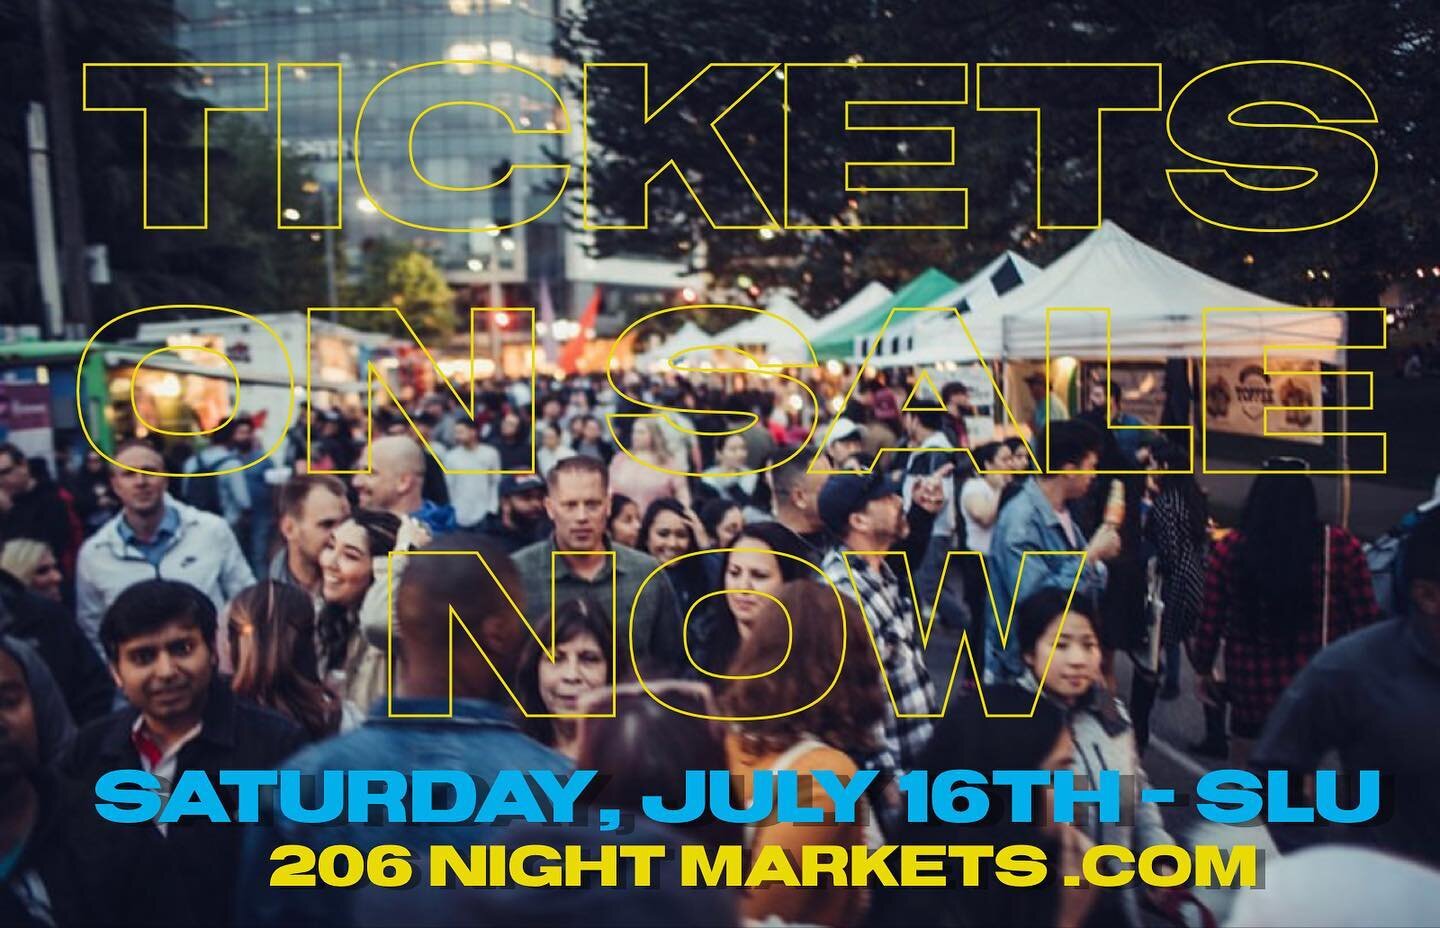 Our Summer Solstice Night Market Tickets are officially on sale today! SAVE 25% ON 4TH OF JULY WEEKEND! Simply use SOUTHLAKEUNION at checkout through Monday benefitting the @sluchamber ! Please remember this ticket is only required for the 21+ area -